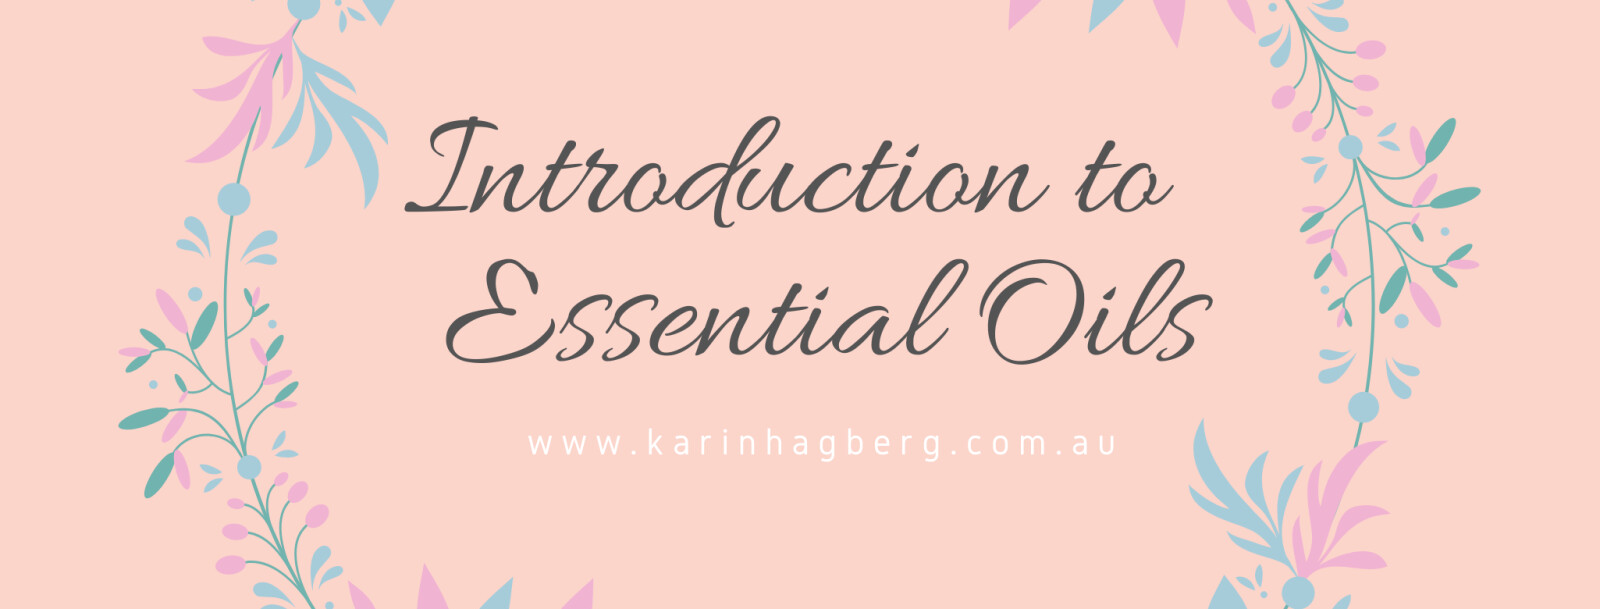 Introduction Journey to Essential Oils